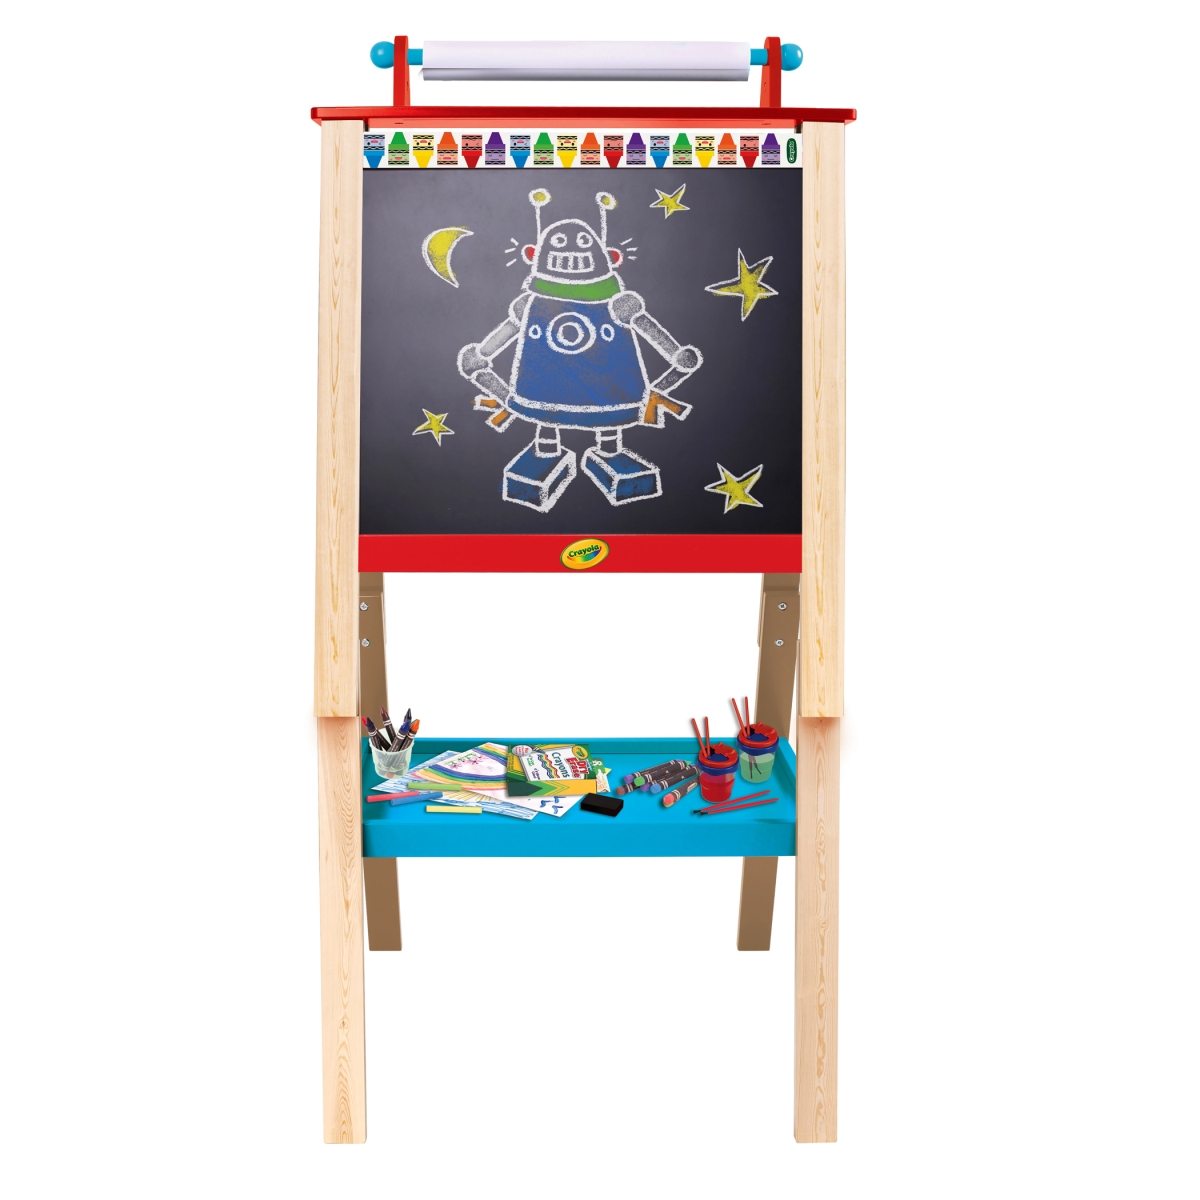 Picture of Grown Up 9028-02 Crayola Double Sided Wood Easel, Multi Color